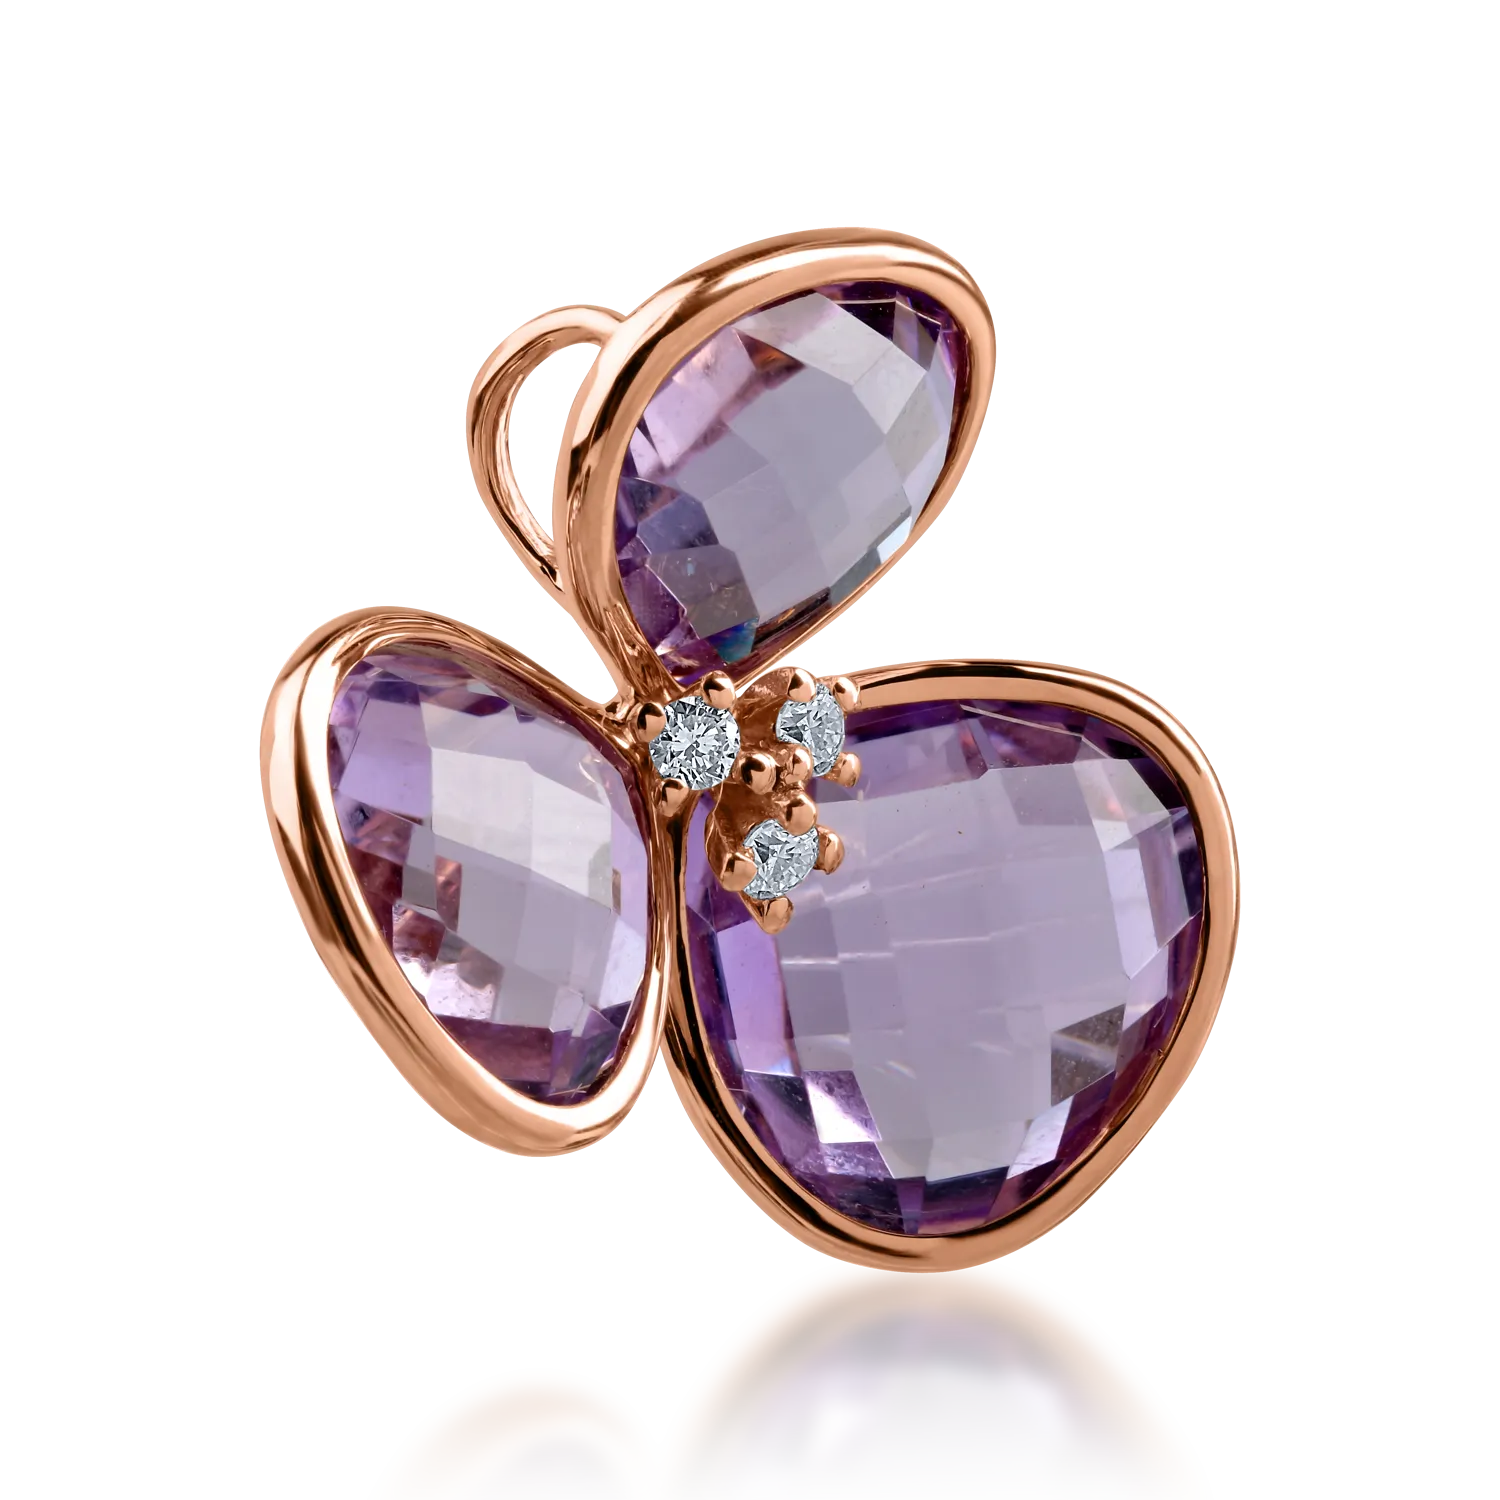 Rose gold flower pendant with 6.3ct pink amethysts and 0.05ct diamonds